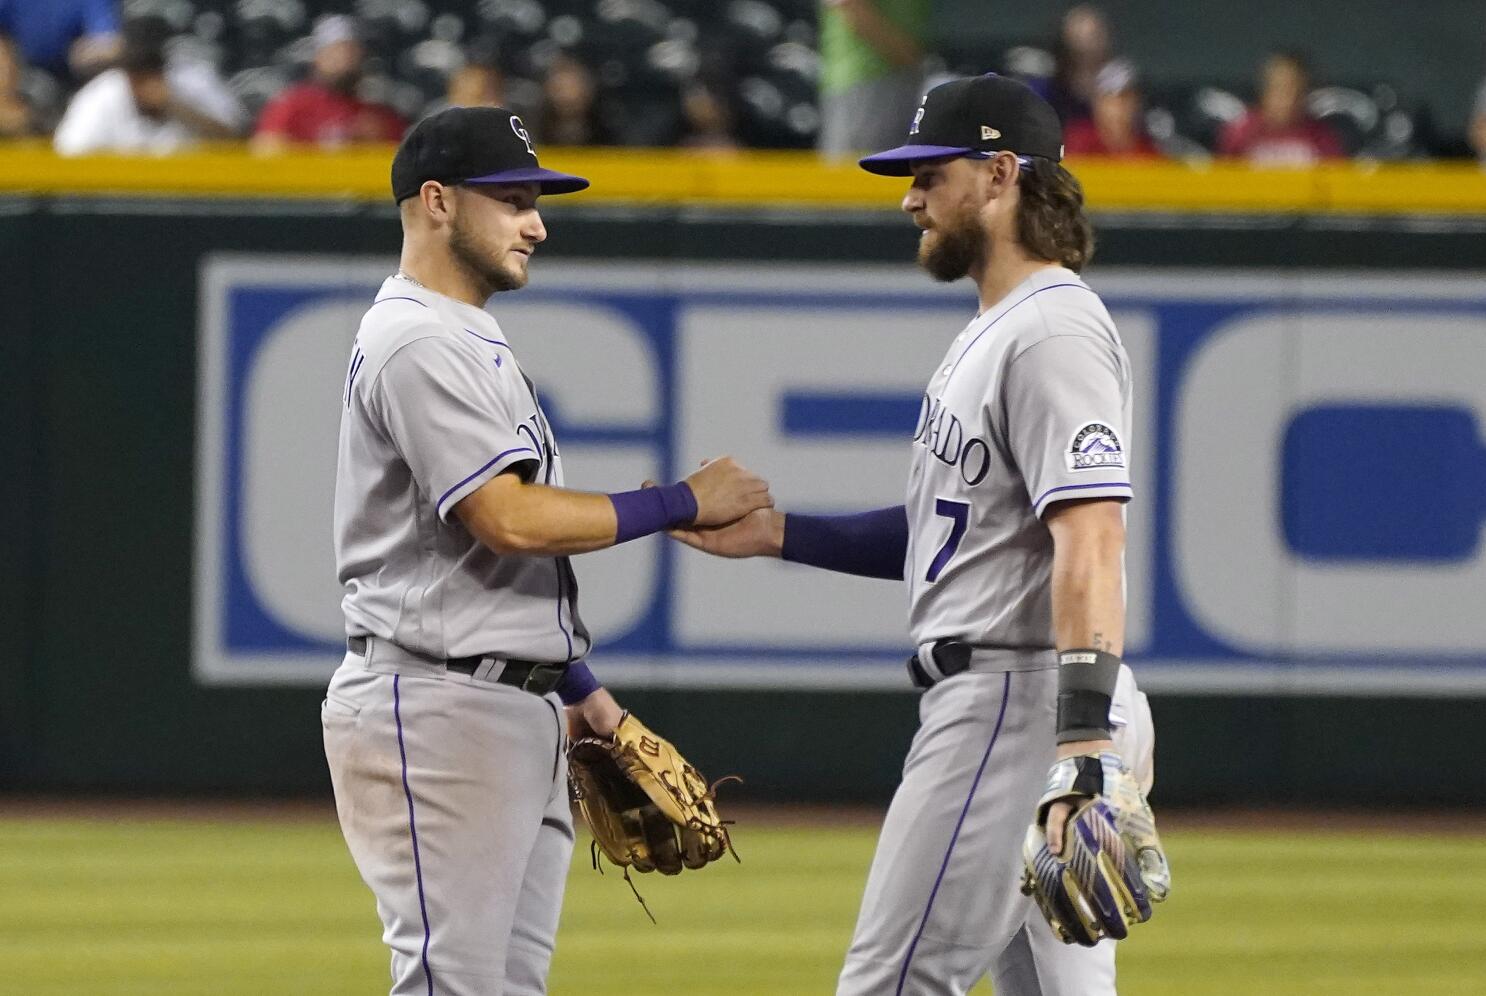 Connor Joe off to hot start with Rockies